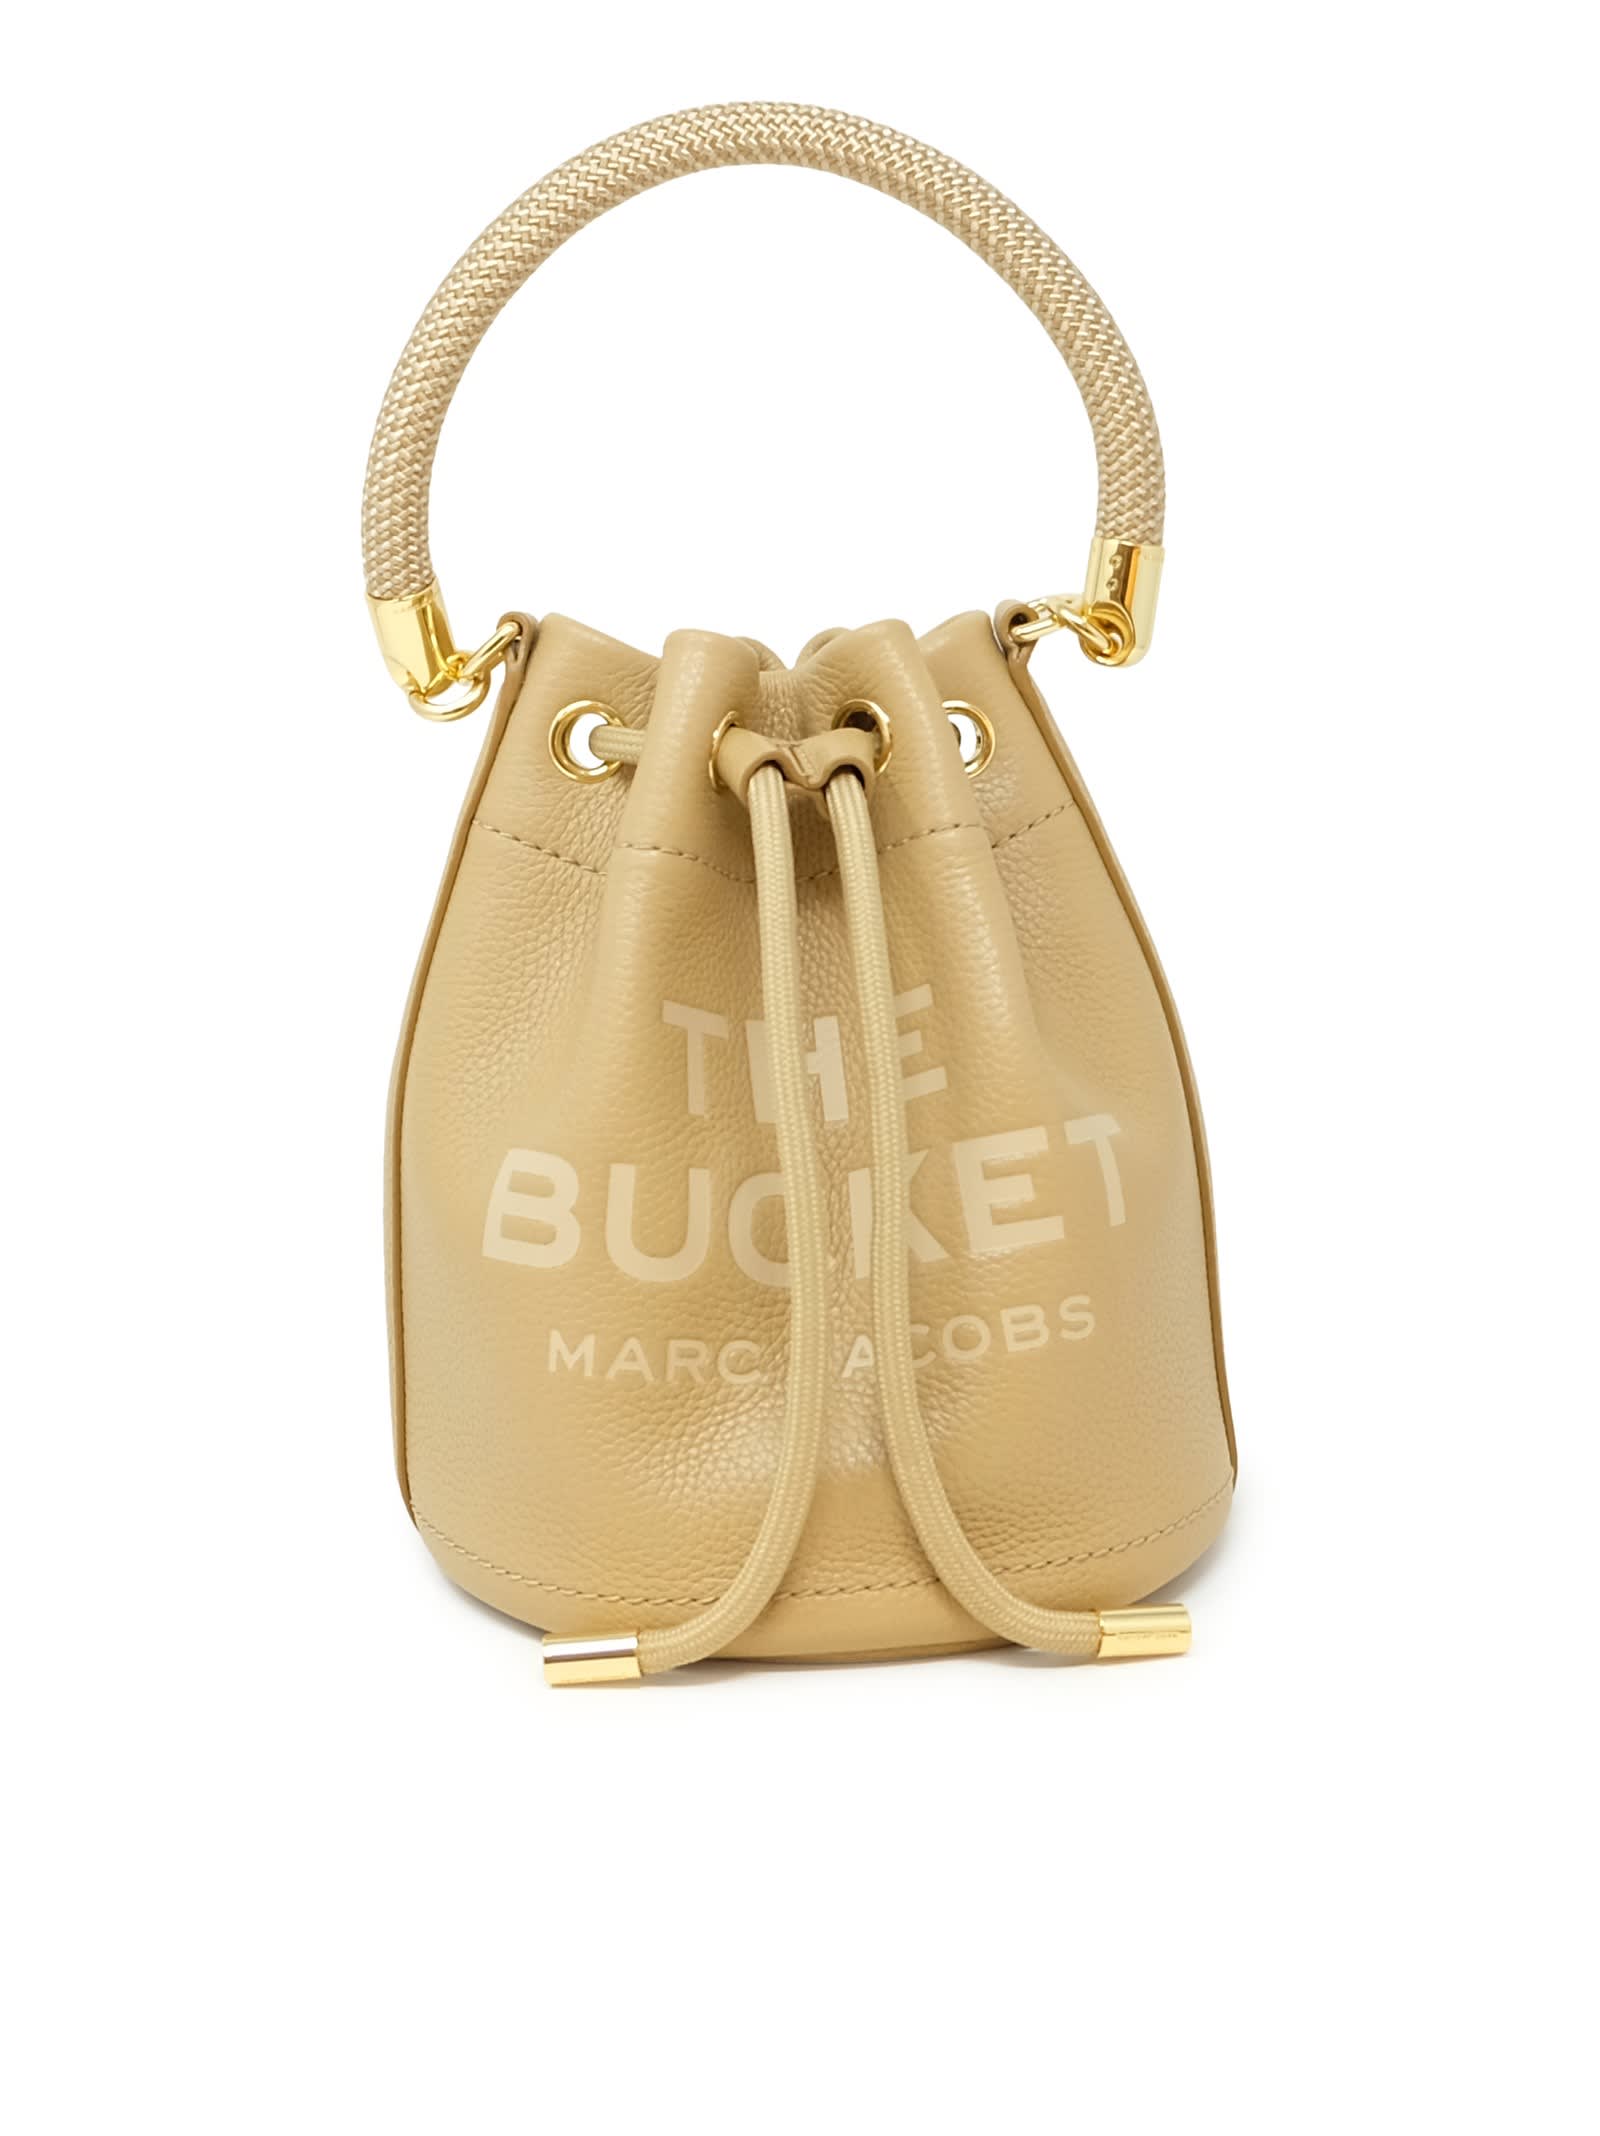 Shop Marc Jacobs Camel Leather The Bucket